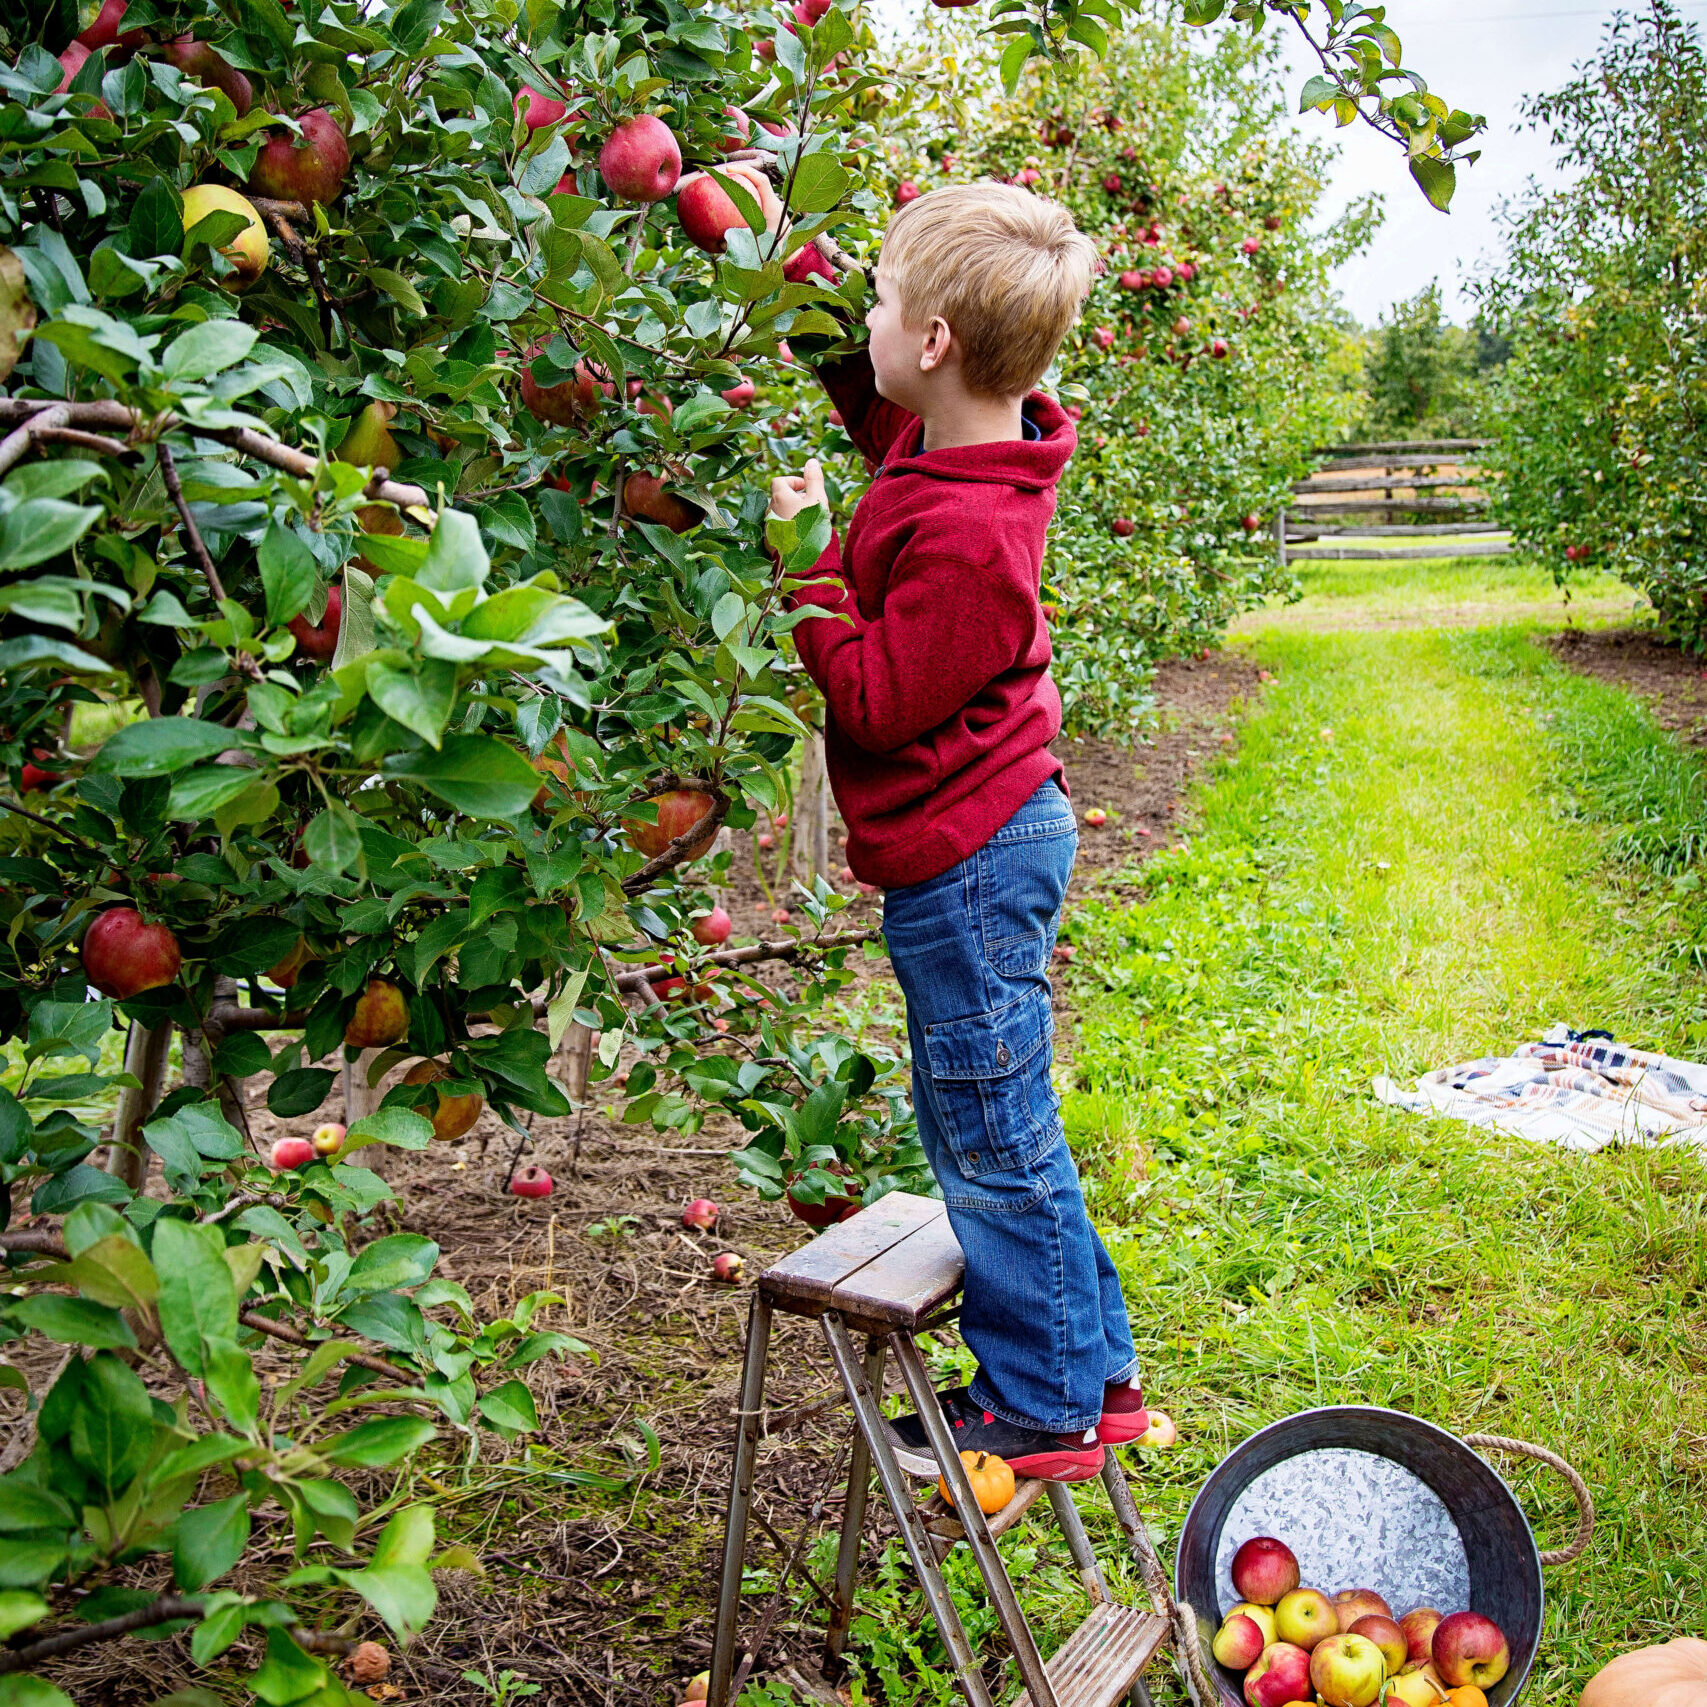 A boy picking apples in the orchard